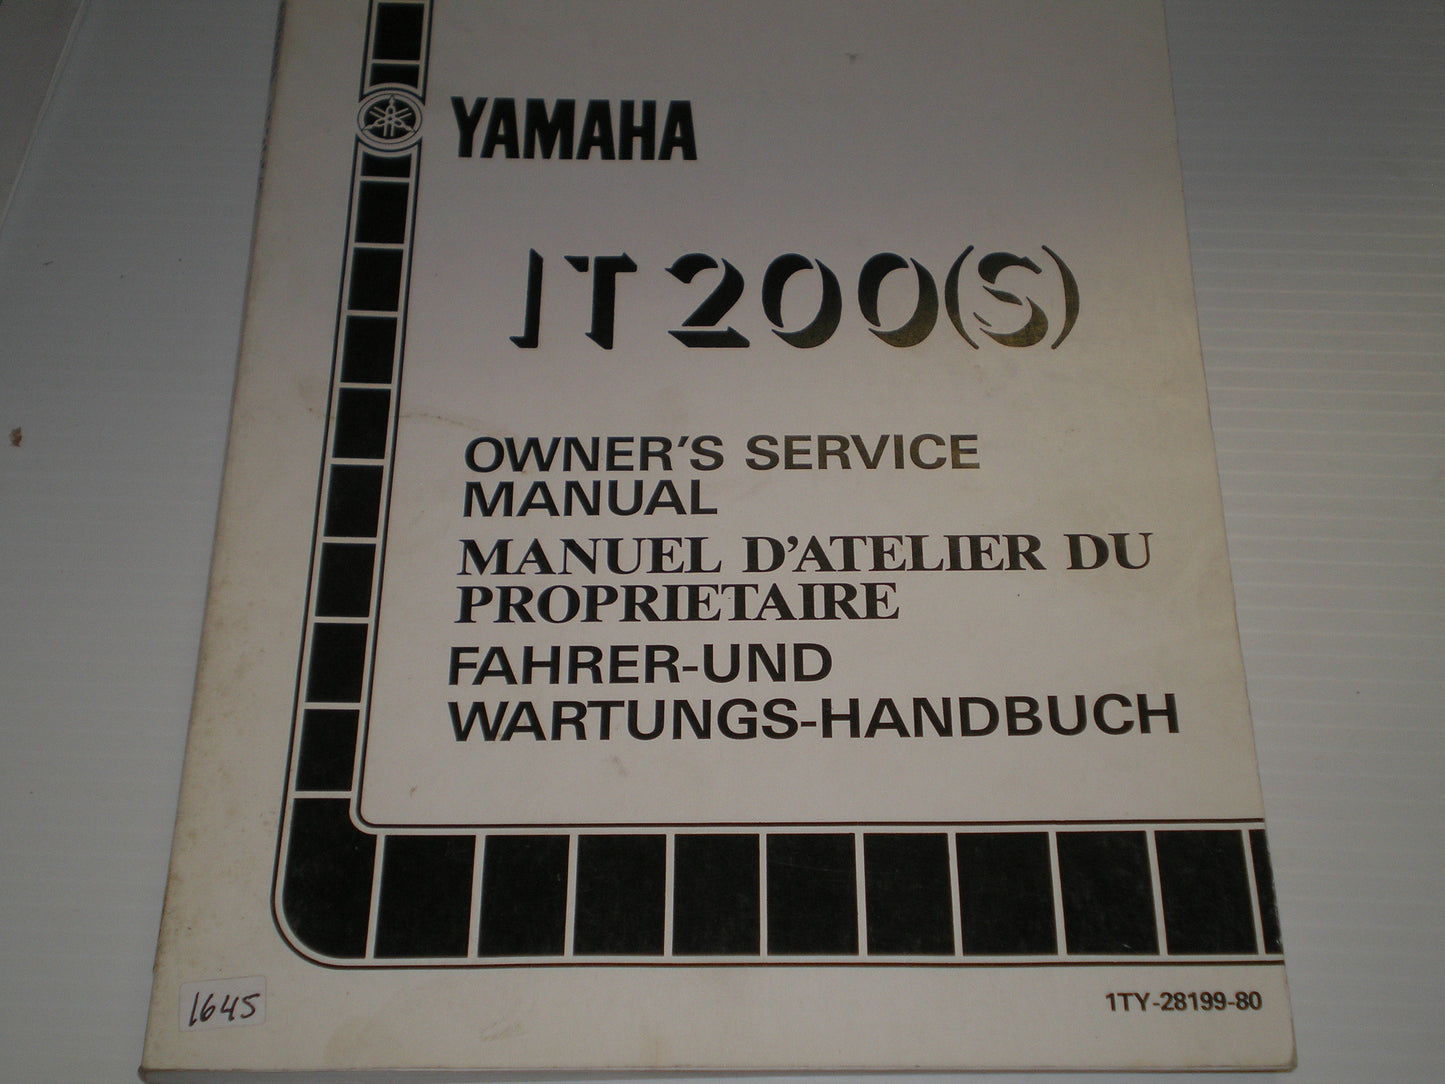 YAMAHA IT200 S  Owner's Service Manual  1TY-28199-80  #1645